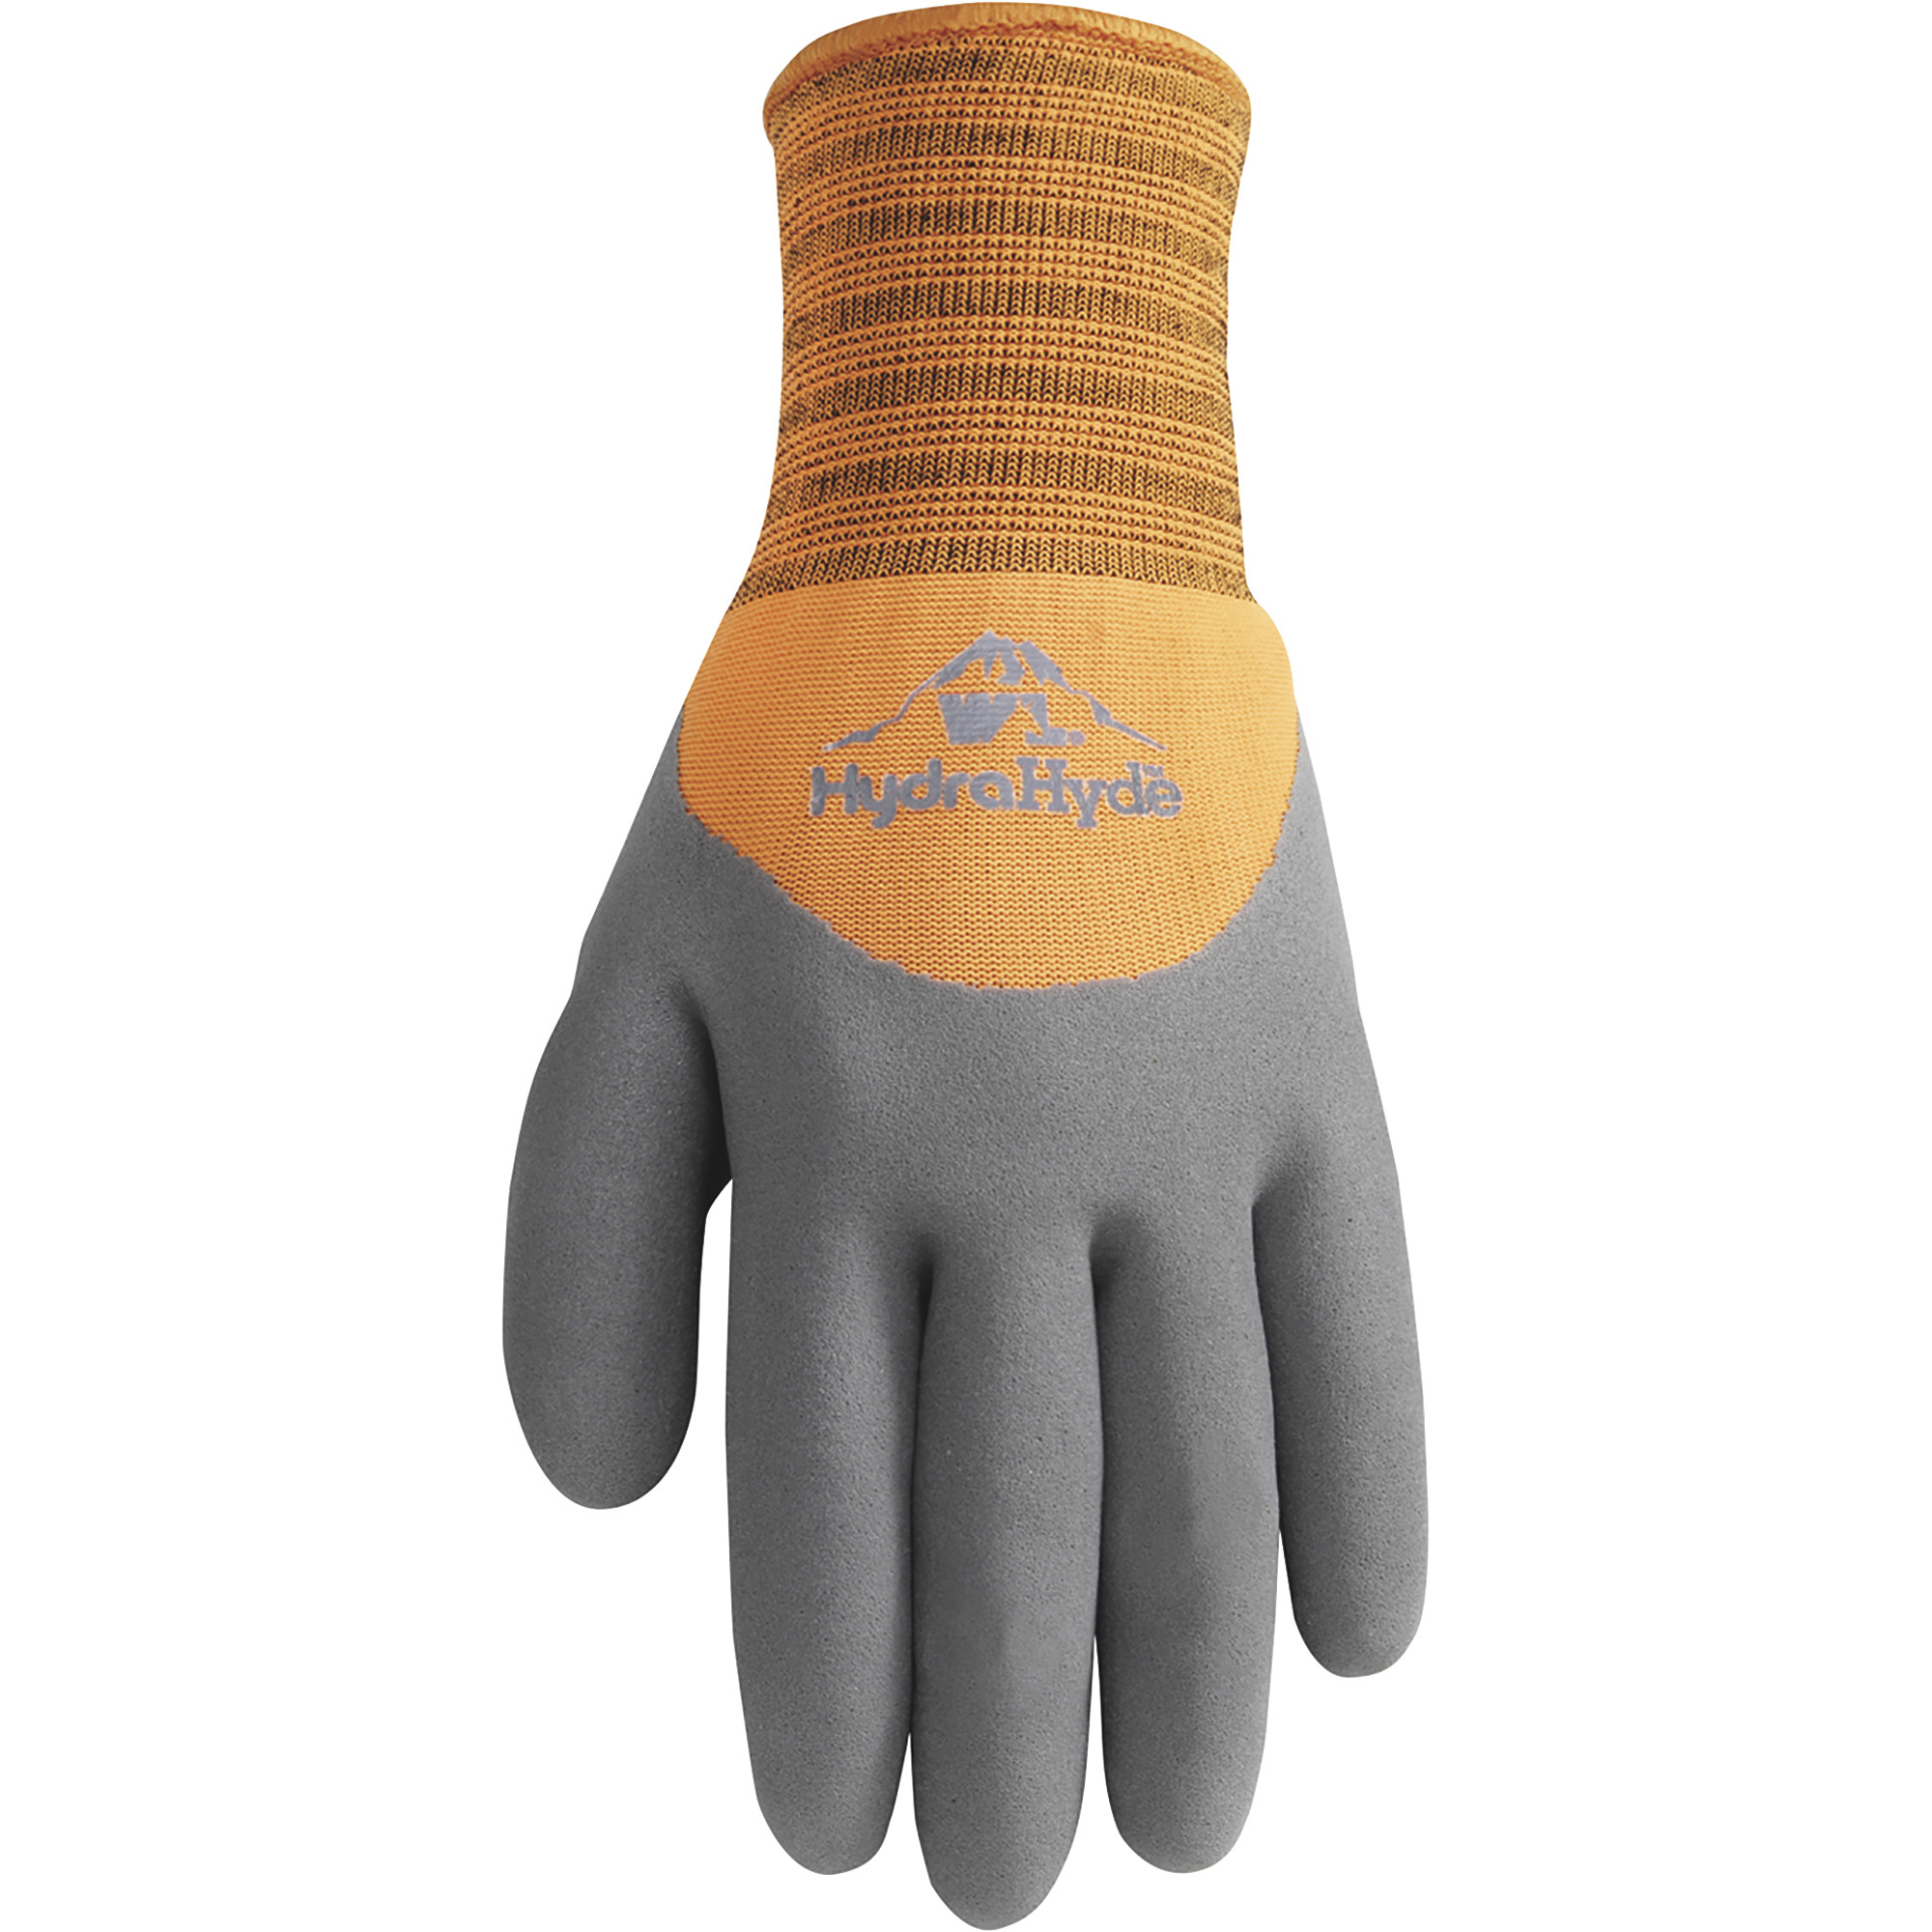 Wells Lamont Men's High Visibility HydraHyde Water-Resistant Lined Work Gloves â Orange, XL